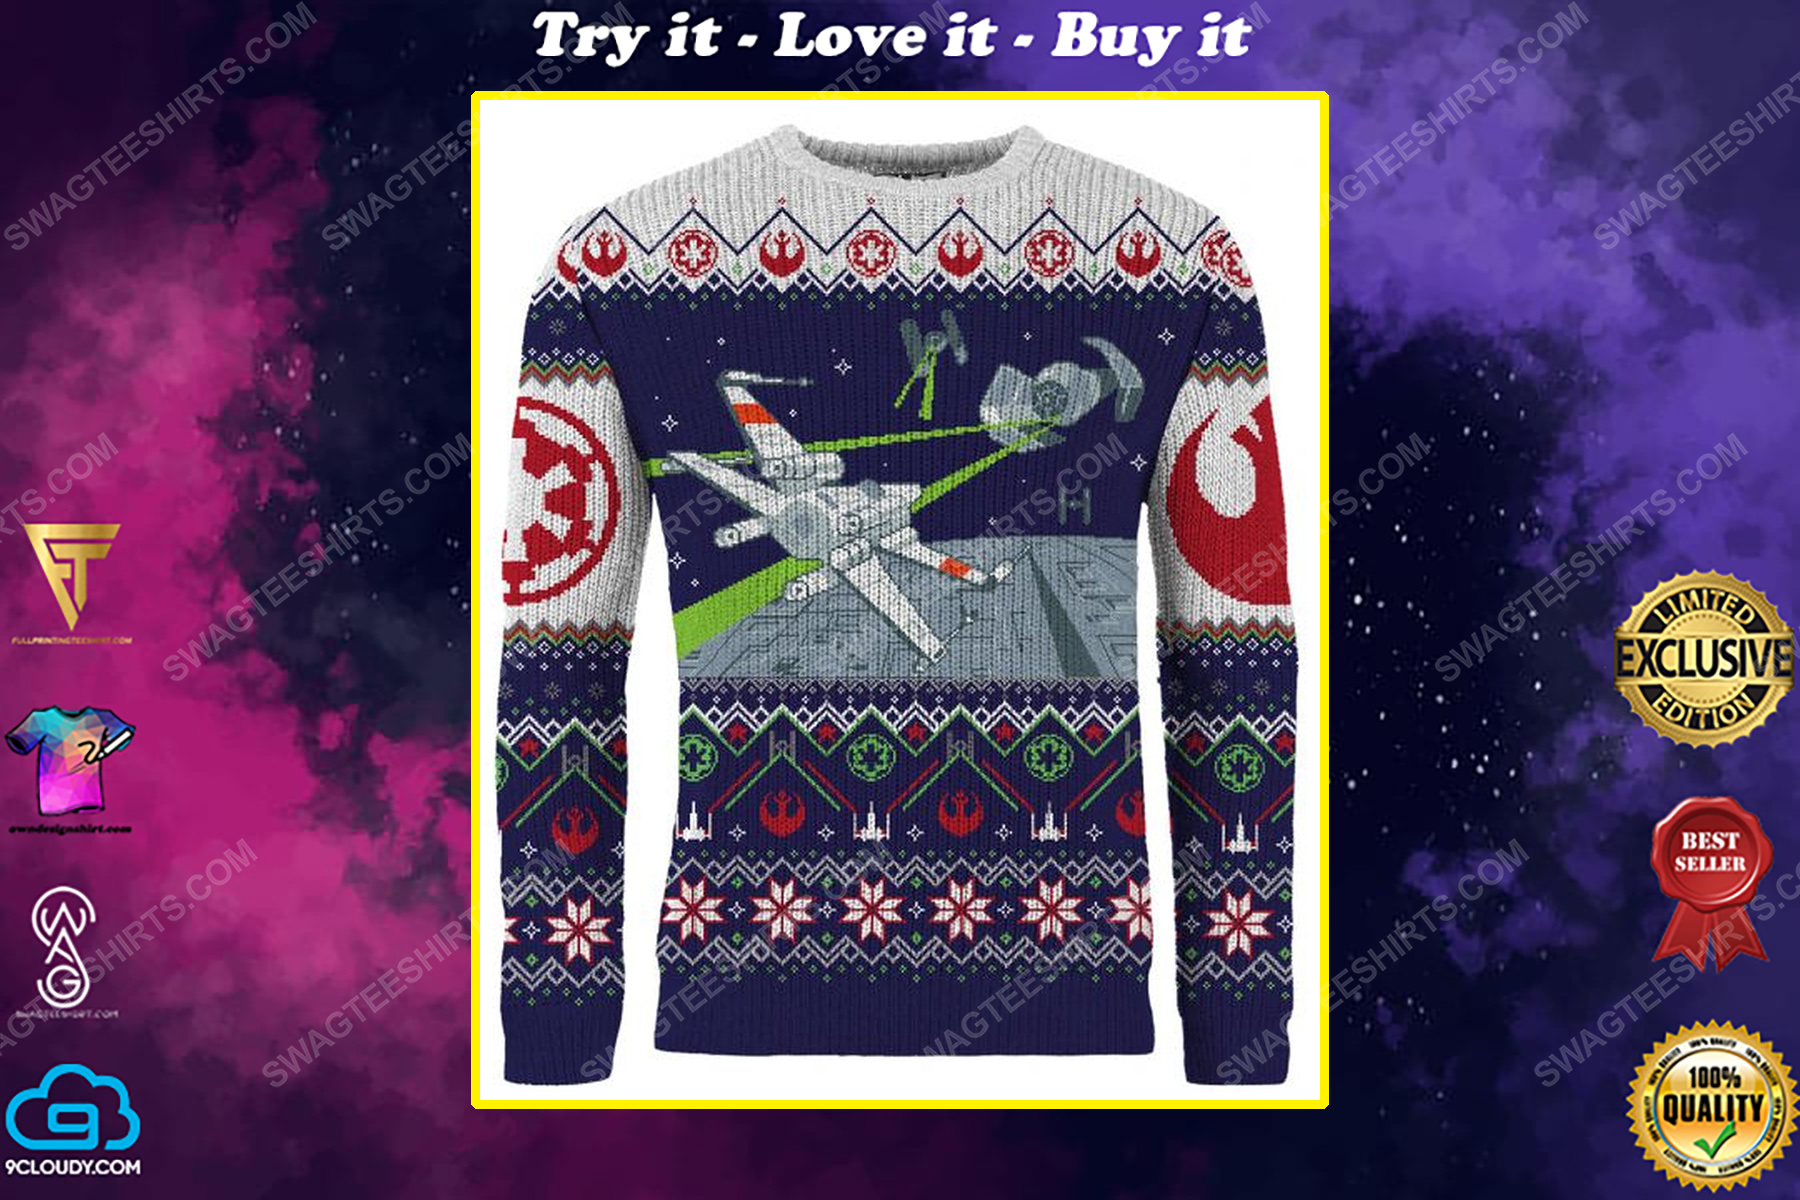 Star wars x-wing and tie fighter full print ugly christmas sweater